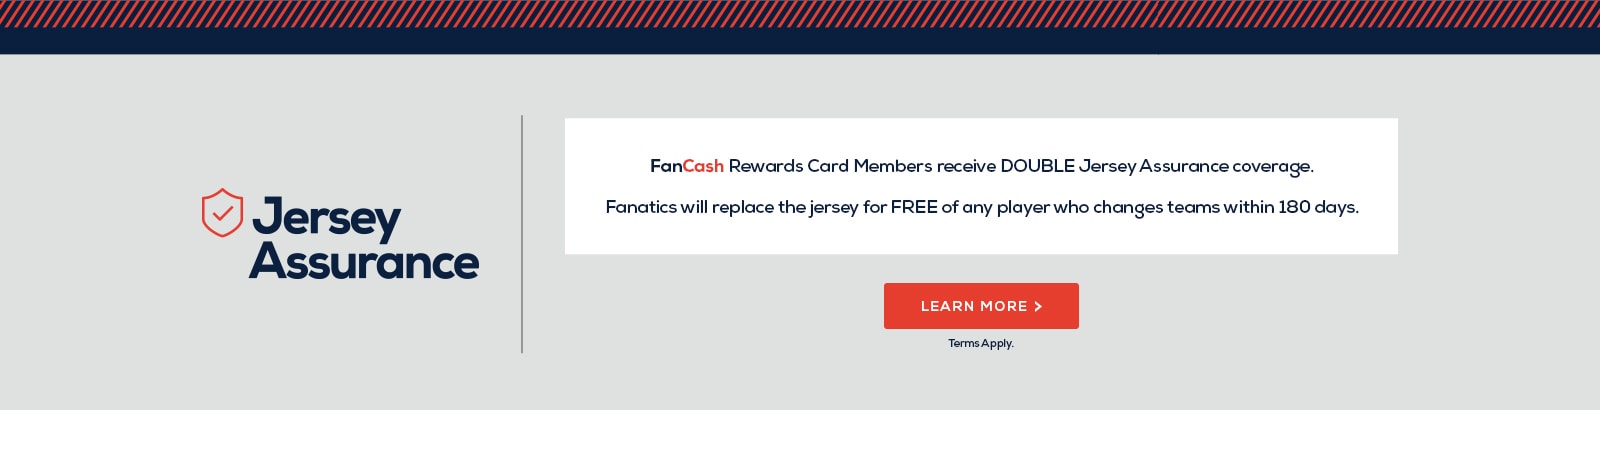 FanCash Rewards Card Members receive DOUBLE Jersey Assurance coverage. Fanatics will replace the jersey for FREE of any player who changes teams within 180 days. Learn more. *Terms Apply.